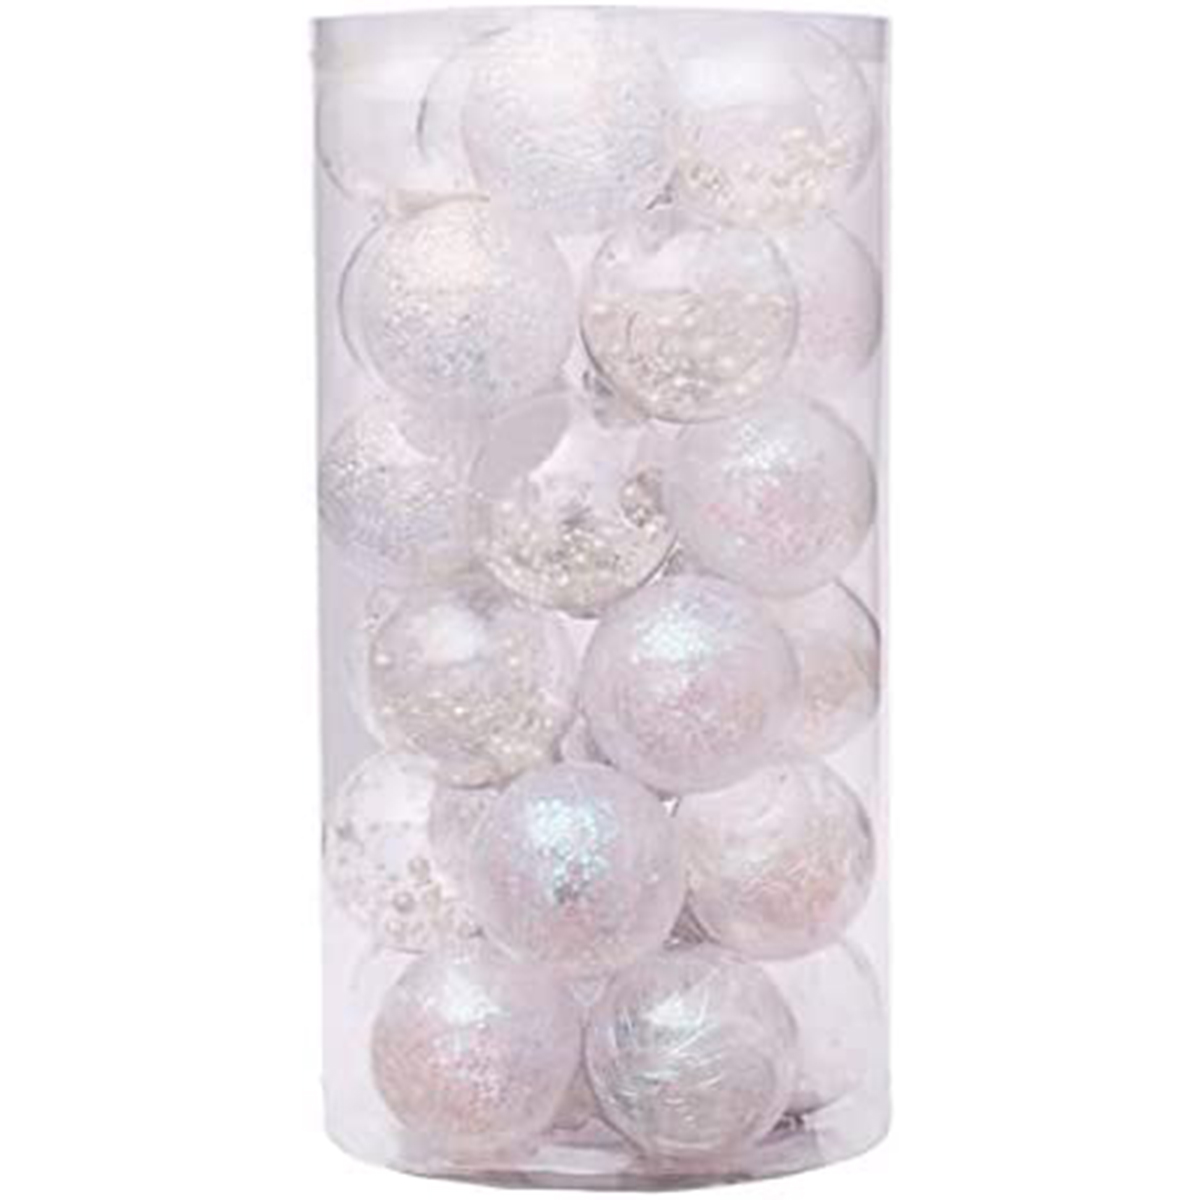 30 PCS Clear Christmas Ball Ornaments 6CM-Iridescent White